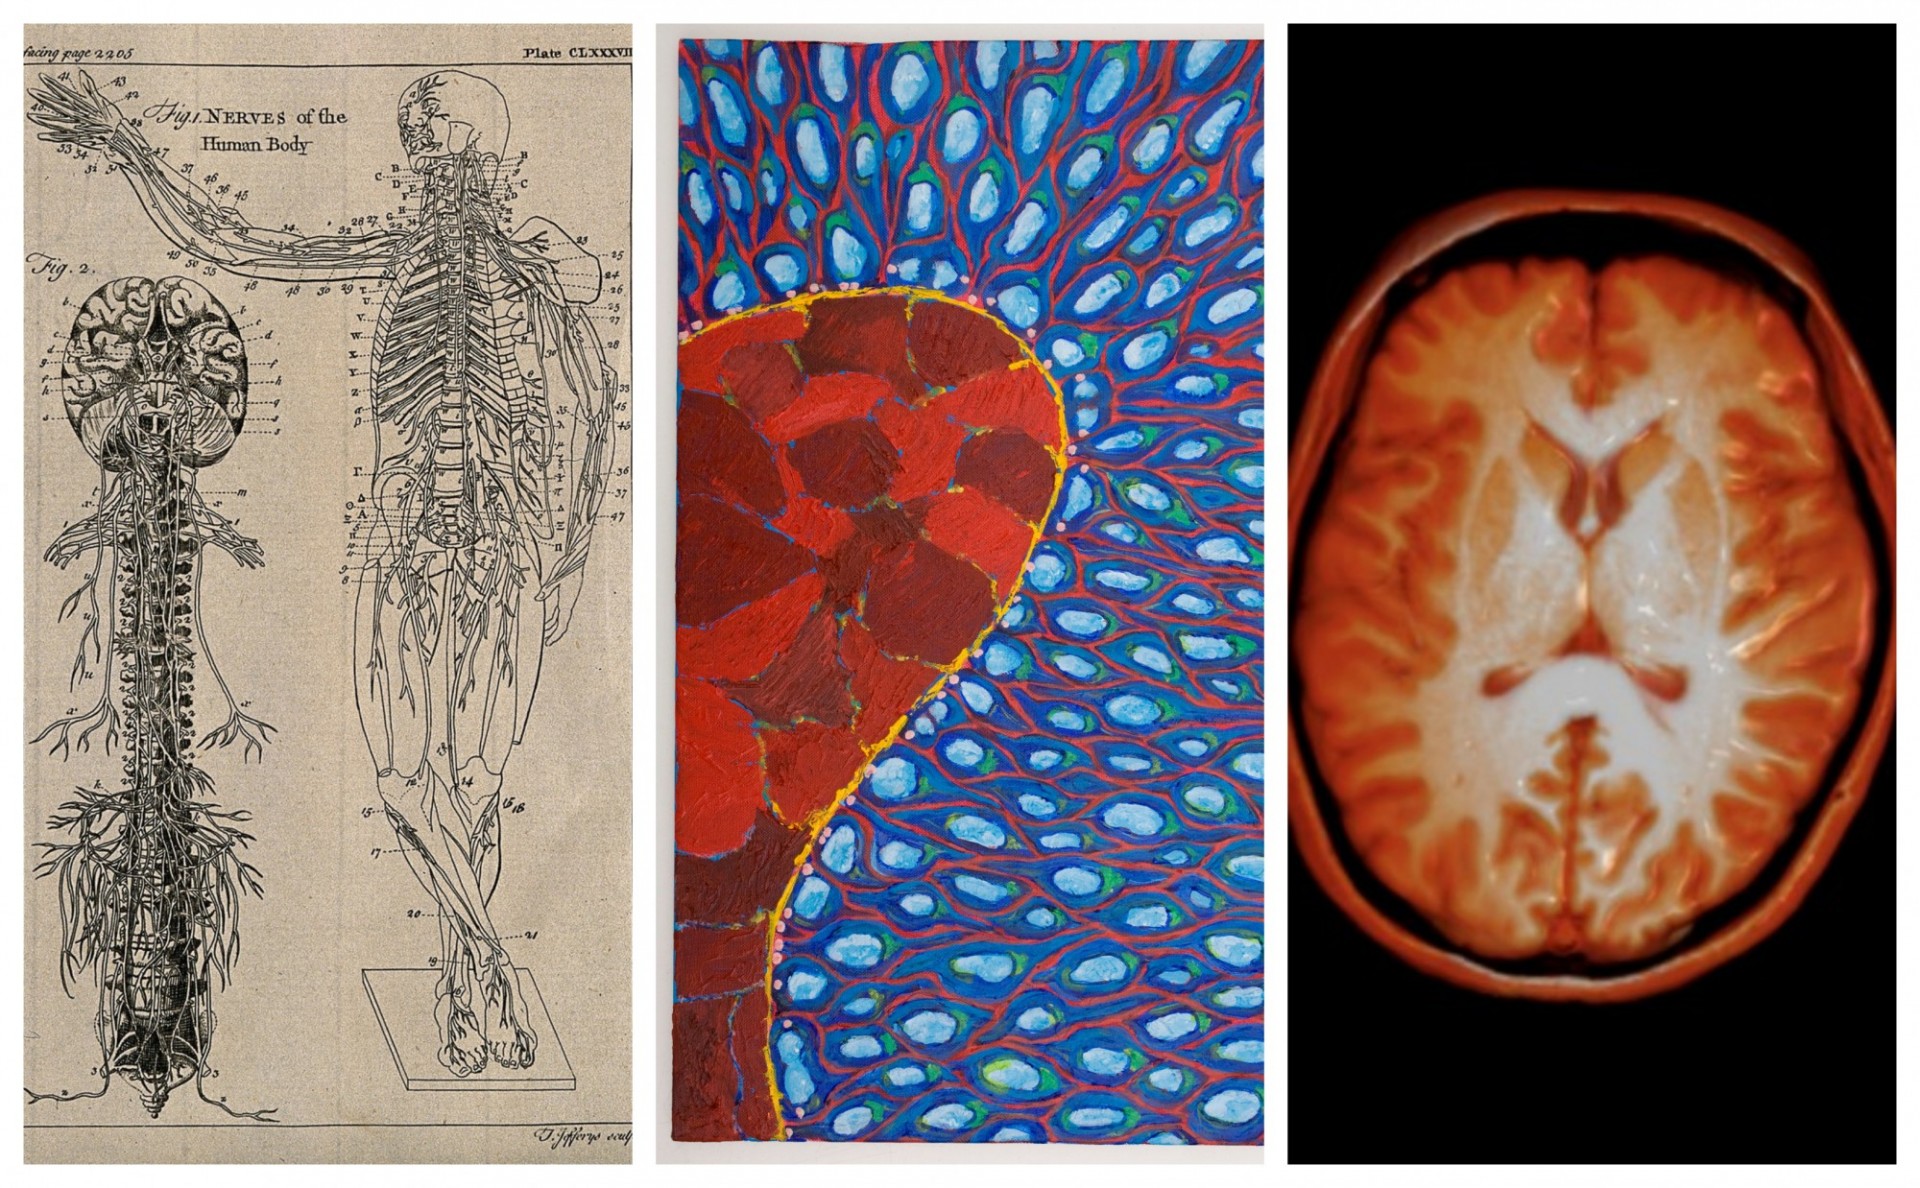 Wellcome Collection images of the brain and nervous system